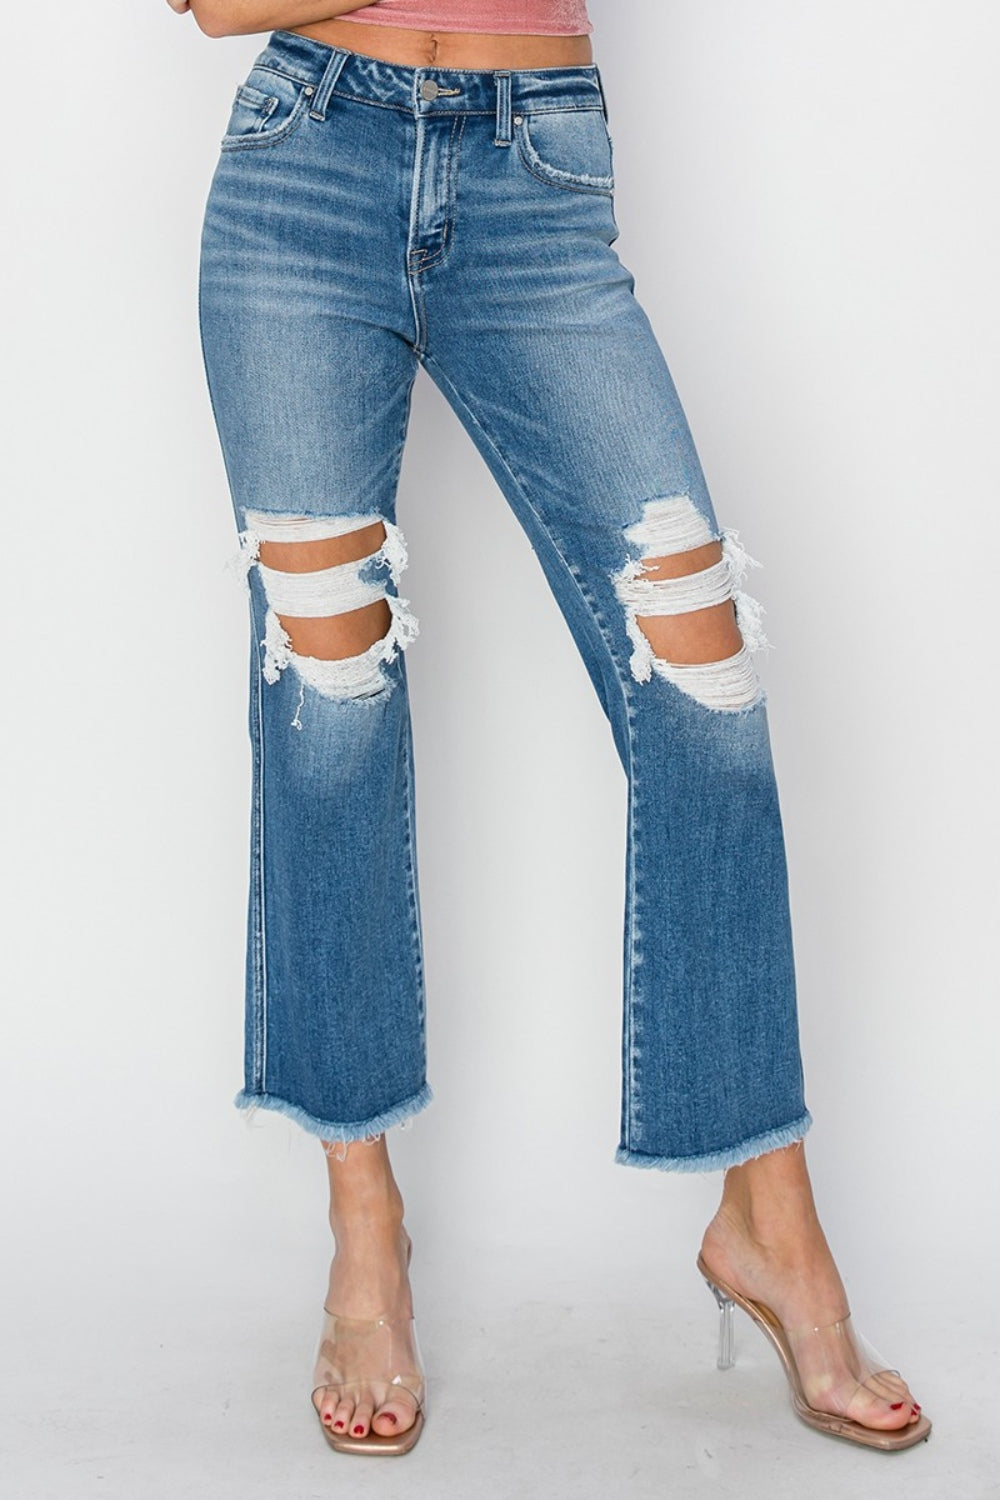 By Design Cropped Flare Jeans - Cheeky Chic Boutique